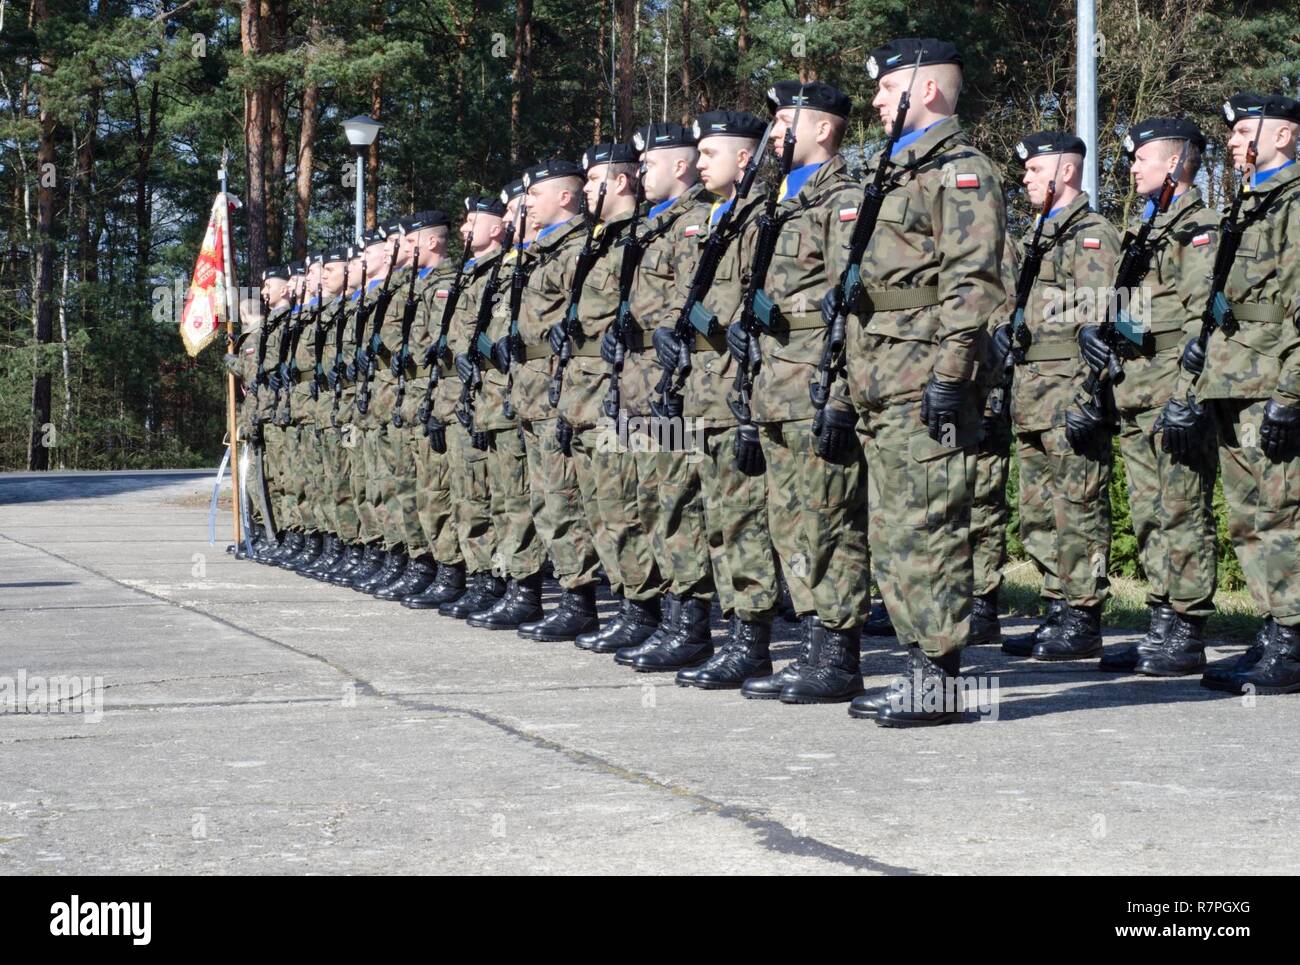 Polish soldiers stand in formation during the commemoration ceremony honoring the 73rd anniversary of the Great Escape from Stalag Luft III POW camp March 24, 2017 at Zagan, Poland.  The ceremony honored the men from 14 nations that were held as POWs at the camp. Members of 3rd ABCT, 4th ID participated in the two-day event to strengthen their relationships with their Polish allies while participating in Operation Atlantic Resolve. Stock Photo